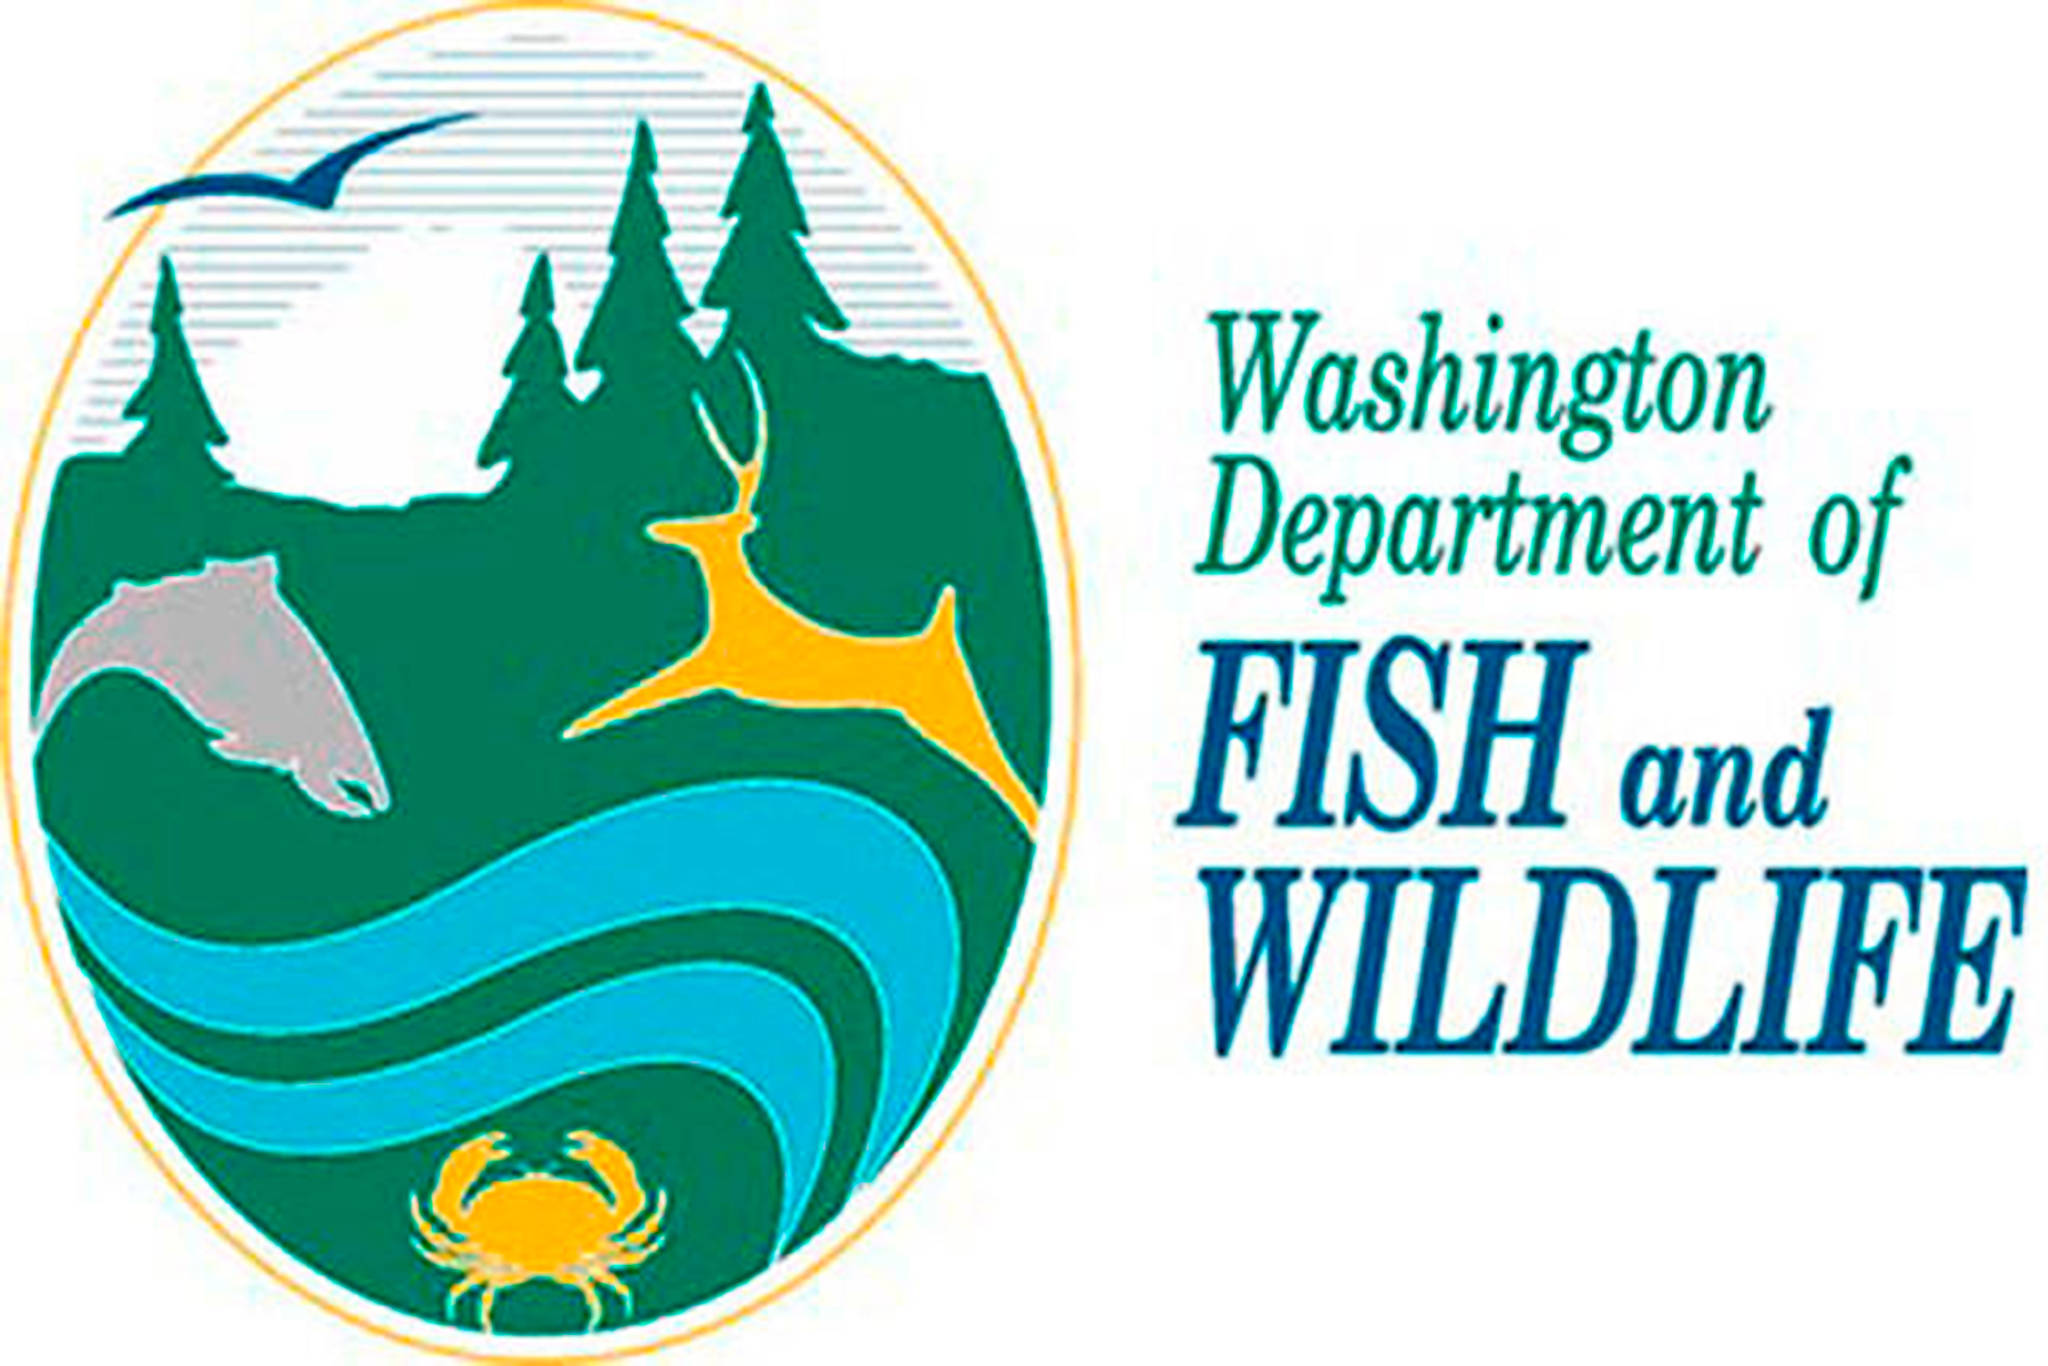 Recreation crab fishing reopens on Oct. 7 in the San Juans